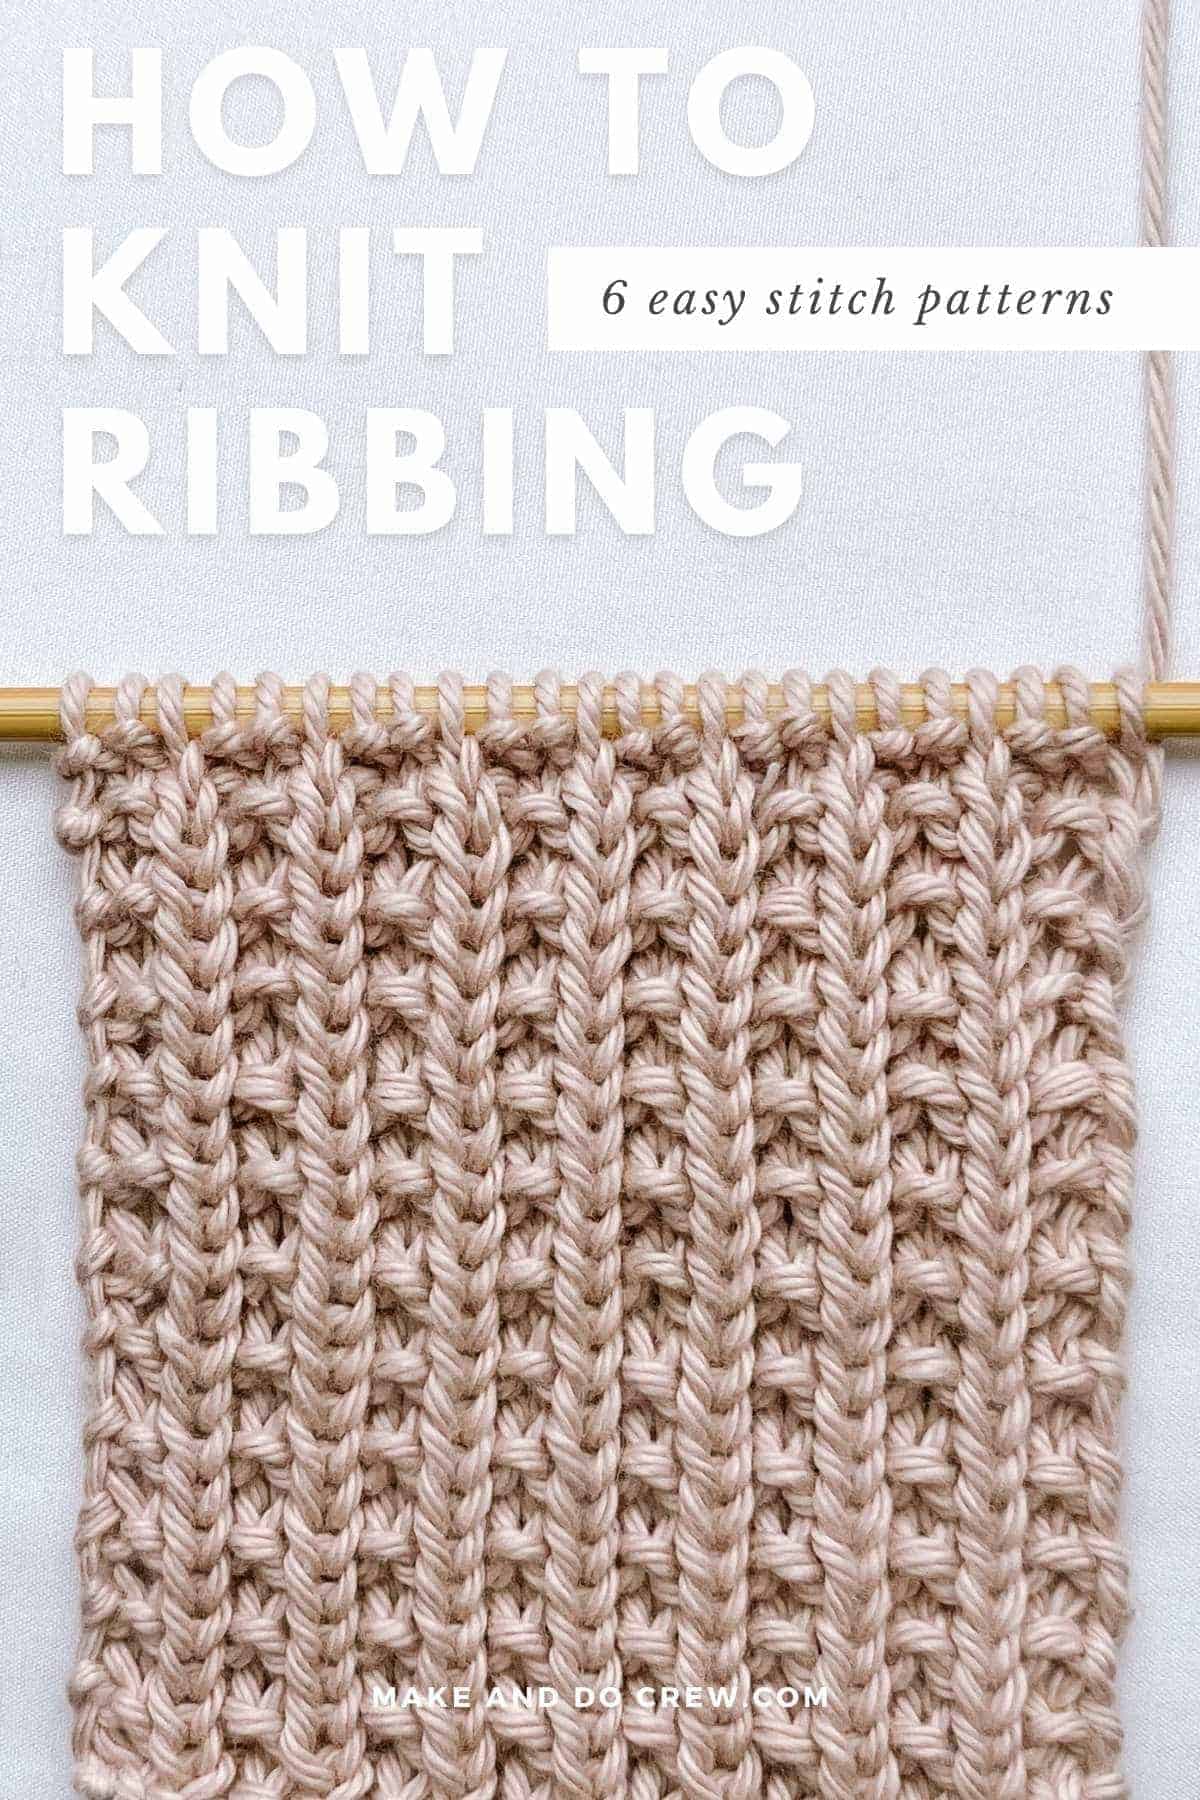 How to knit the yarn over bind off - creates a super stretchy edge [+video]